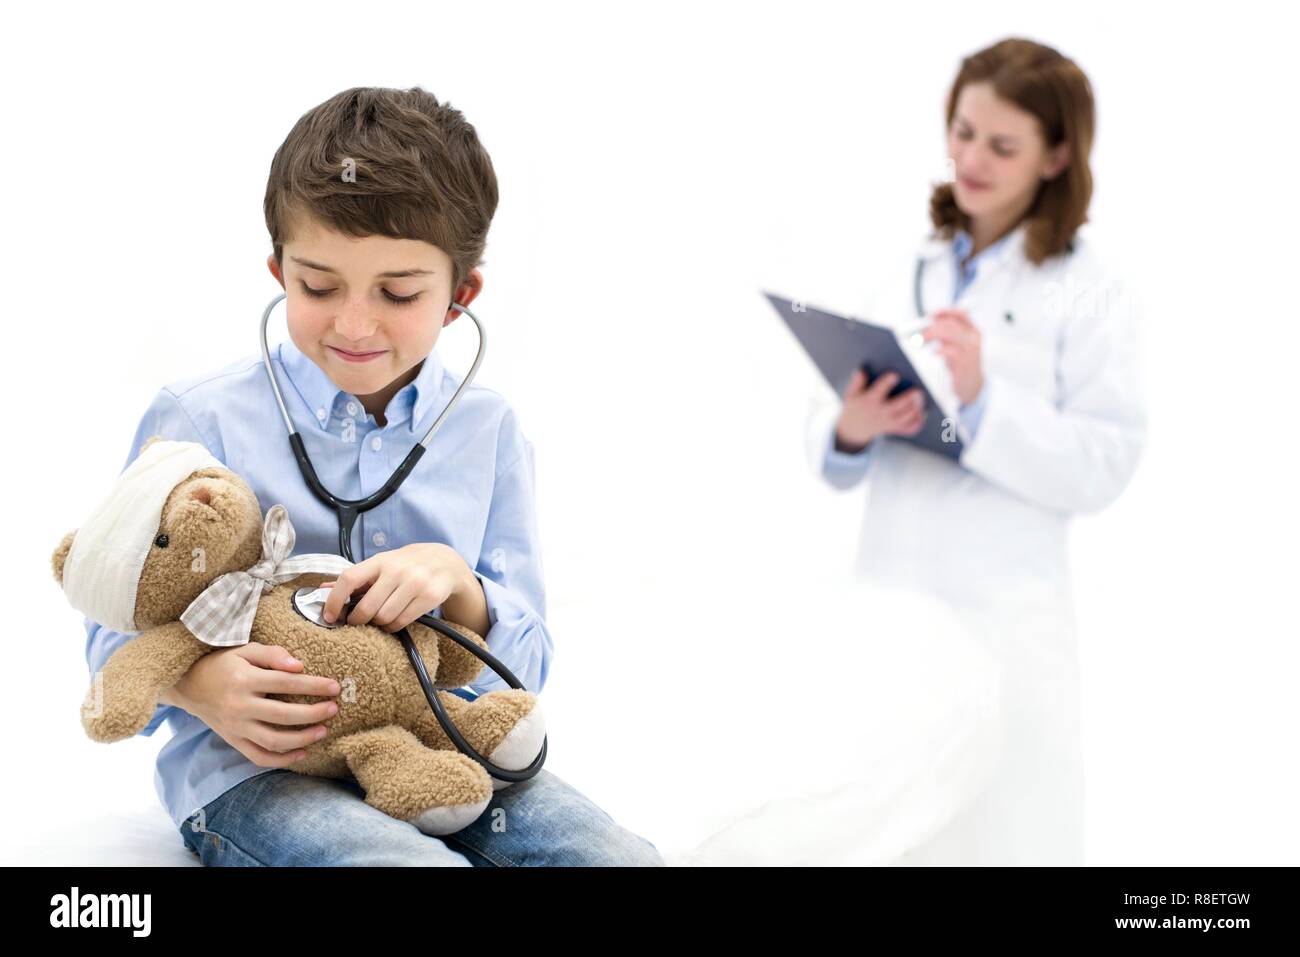 Boy role playing with teddy bear and stethoscope with doctor in background. Stock Photo